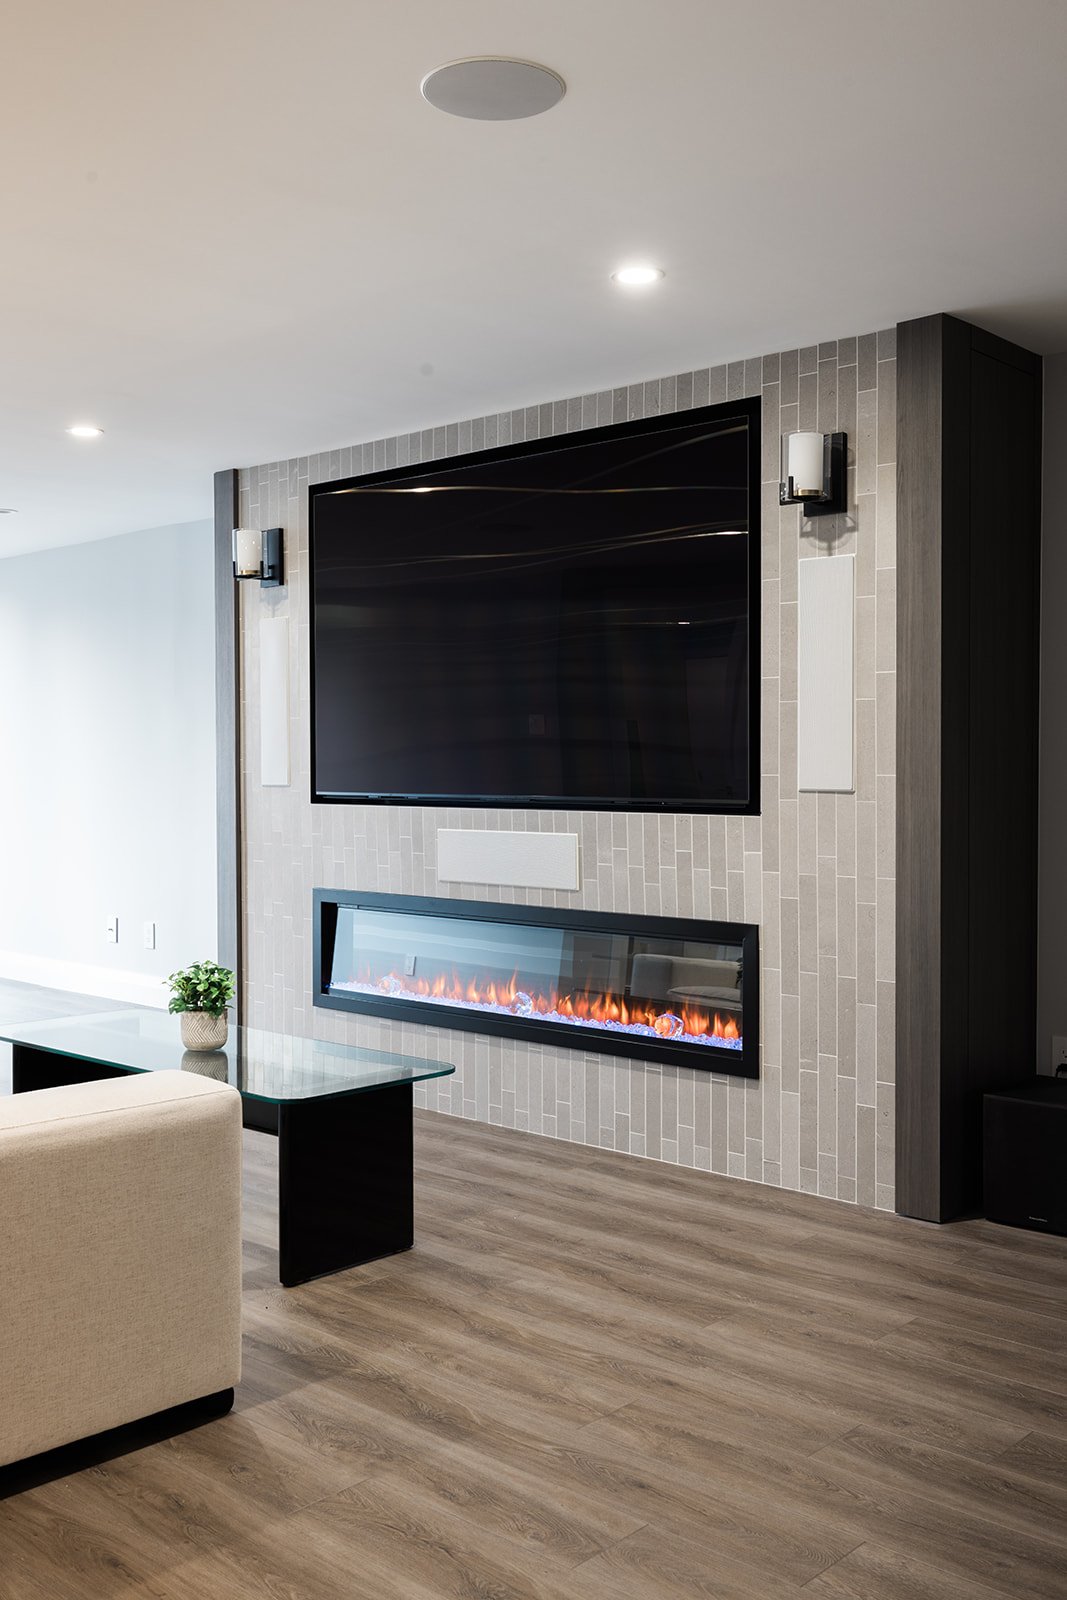 View of custom fireplace in living room in downtown Toronto condo renovation with recessed lighting above fireplace